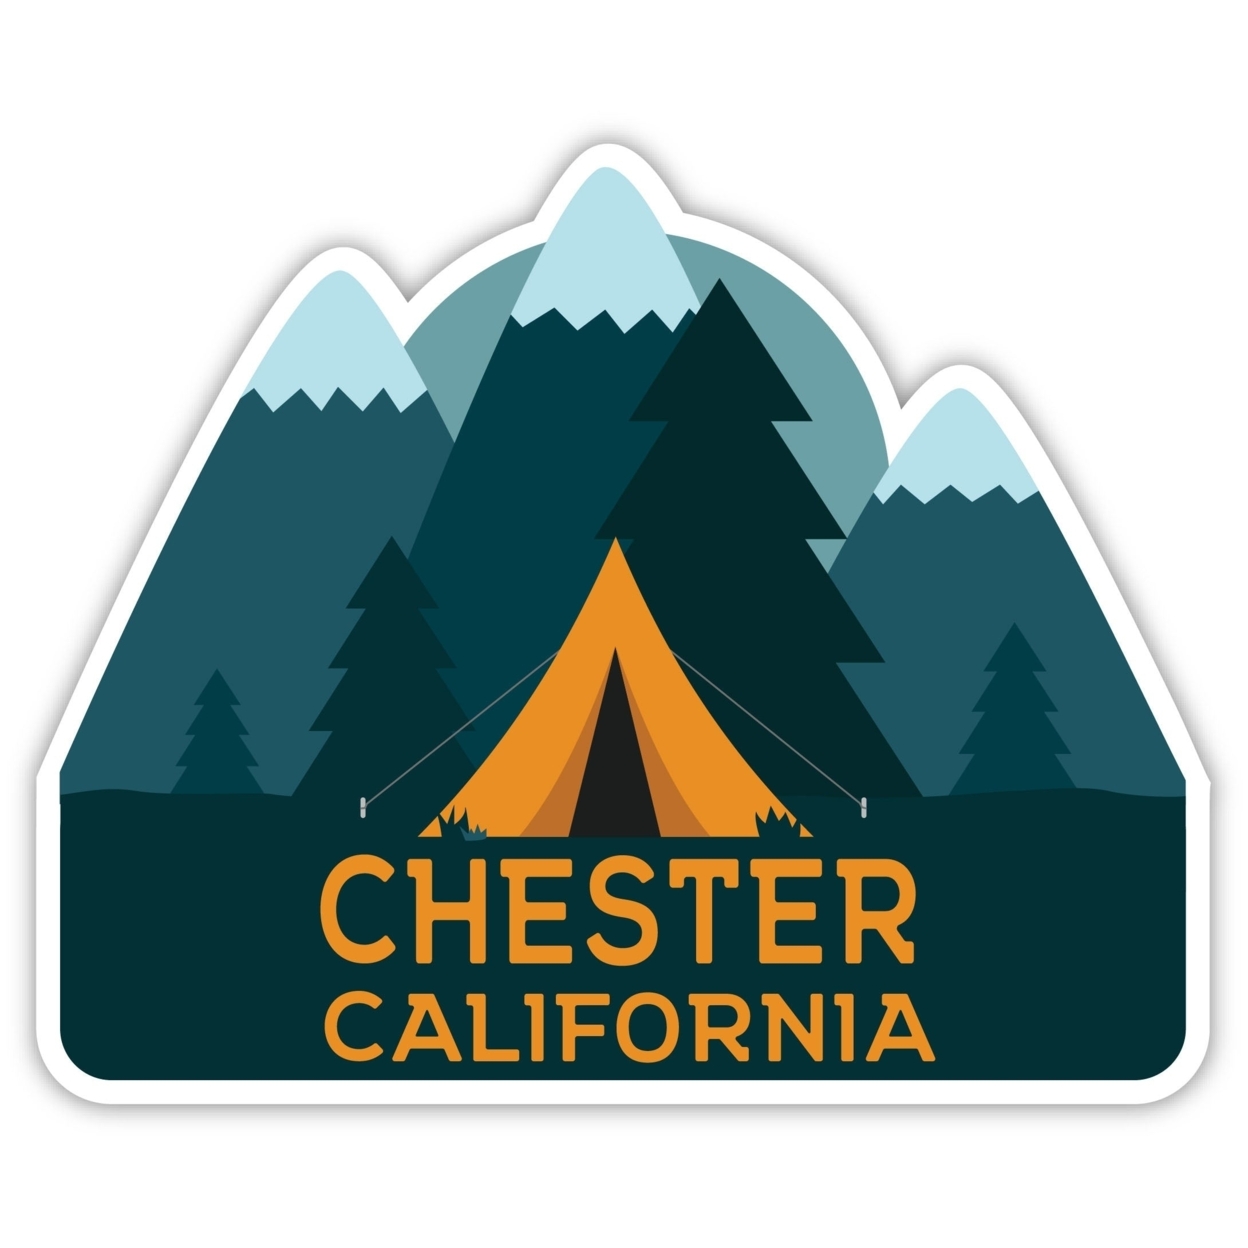 Chester California Souvenir Decorative Stickers (Choose Theme And Size) - 4-Pack, 12-Inch, Tent